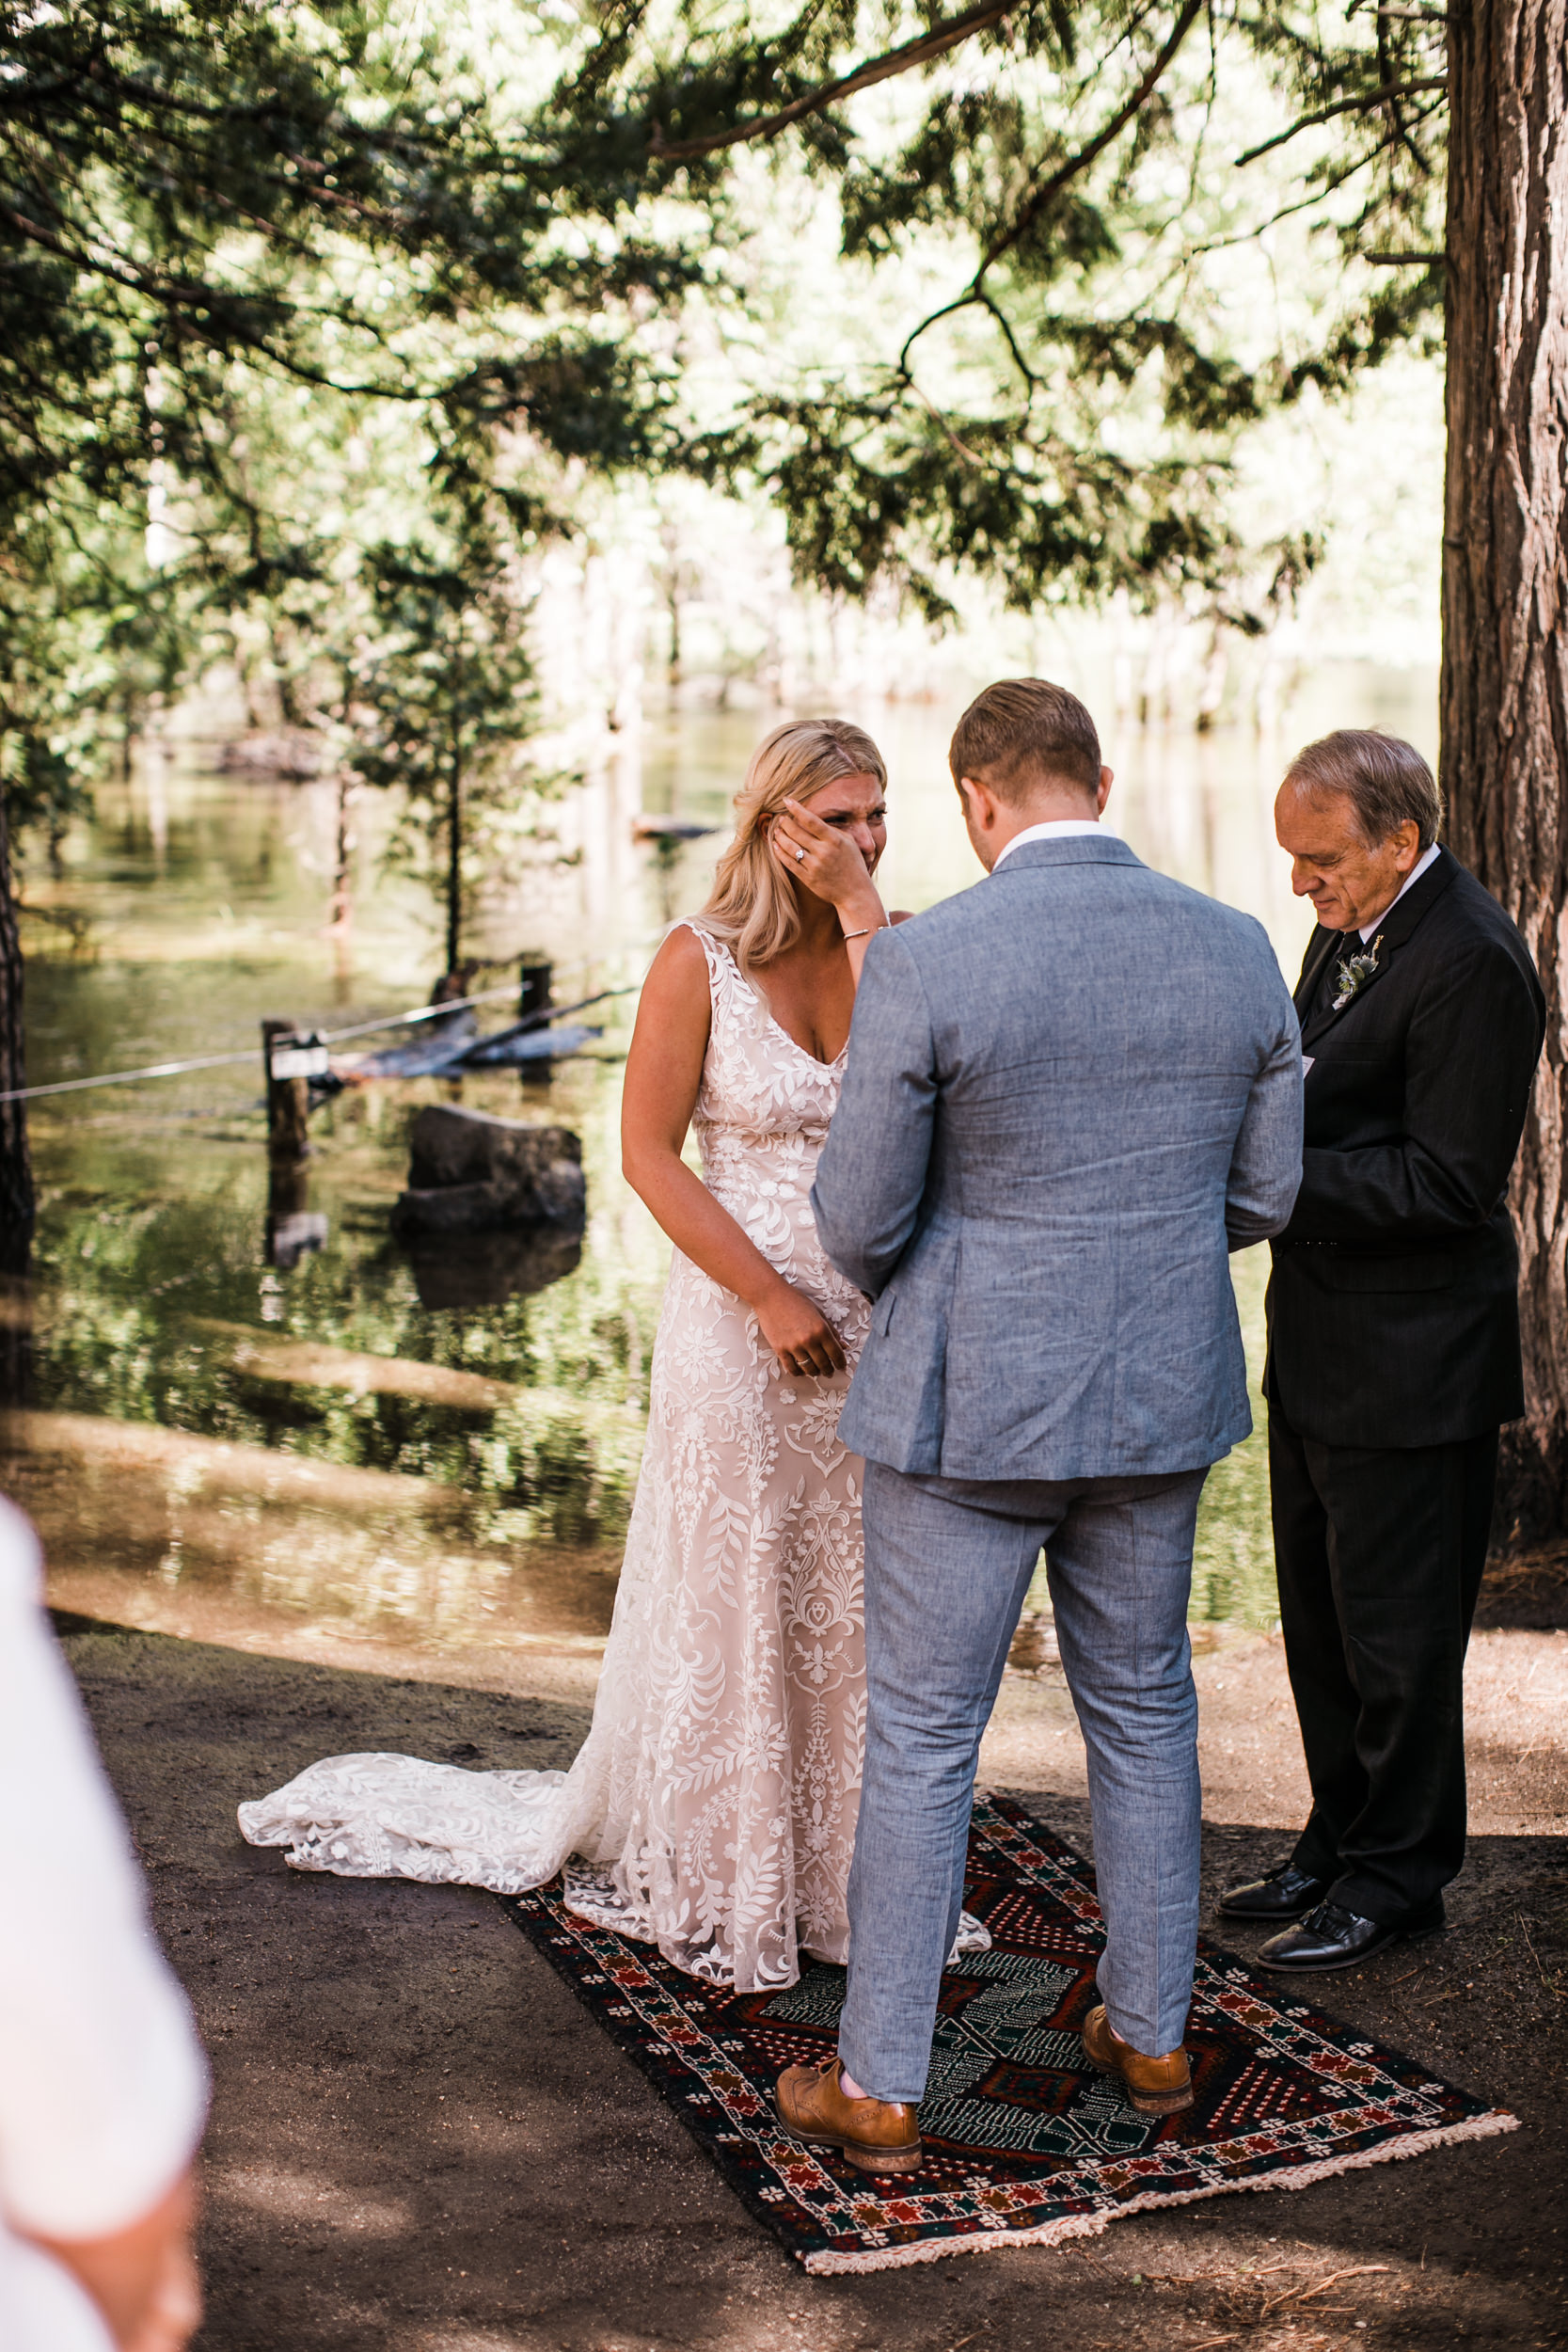 Erika + Grant’s intimate Yosemite National Park destination wedding + romantic backyard reception under twinkle lights | ceremony in the woods in yosemite valley | the hearnes adventure photography